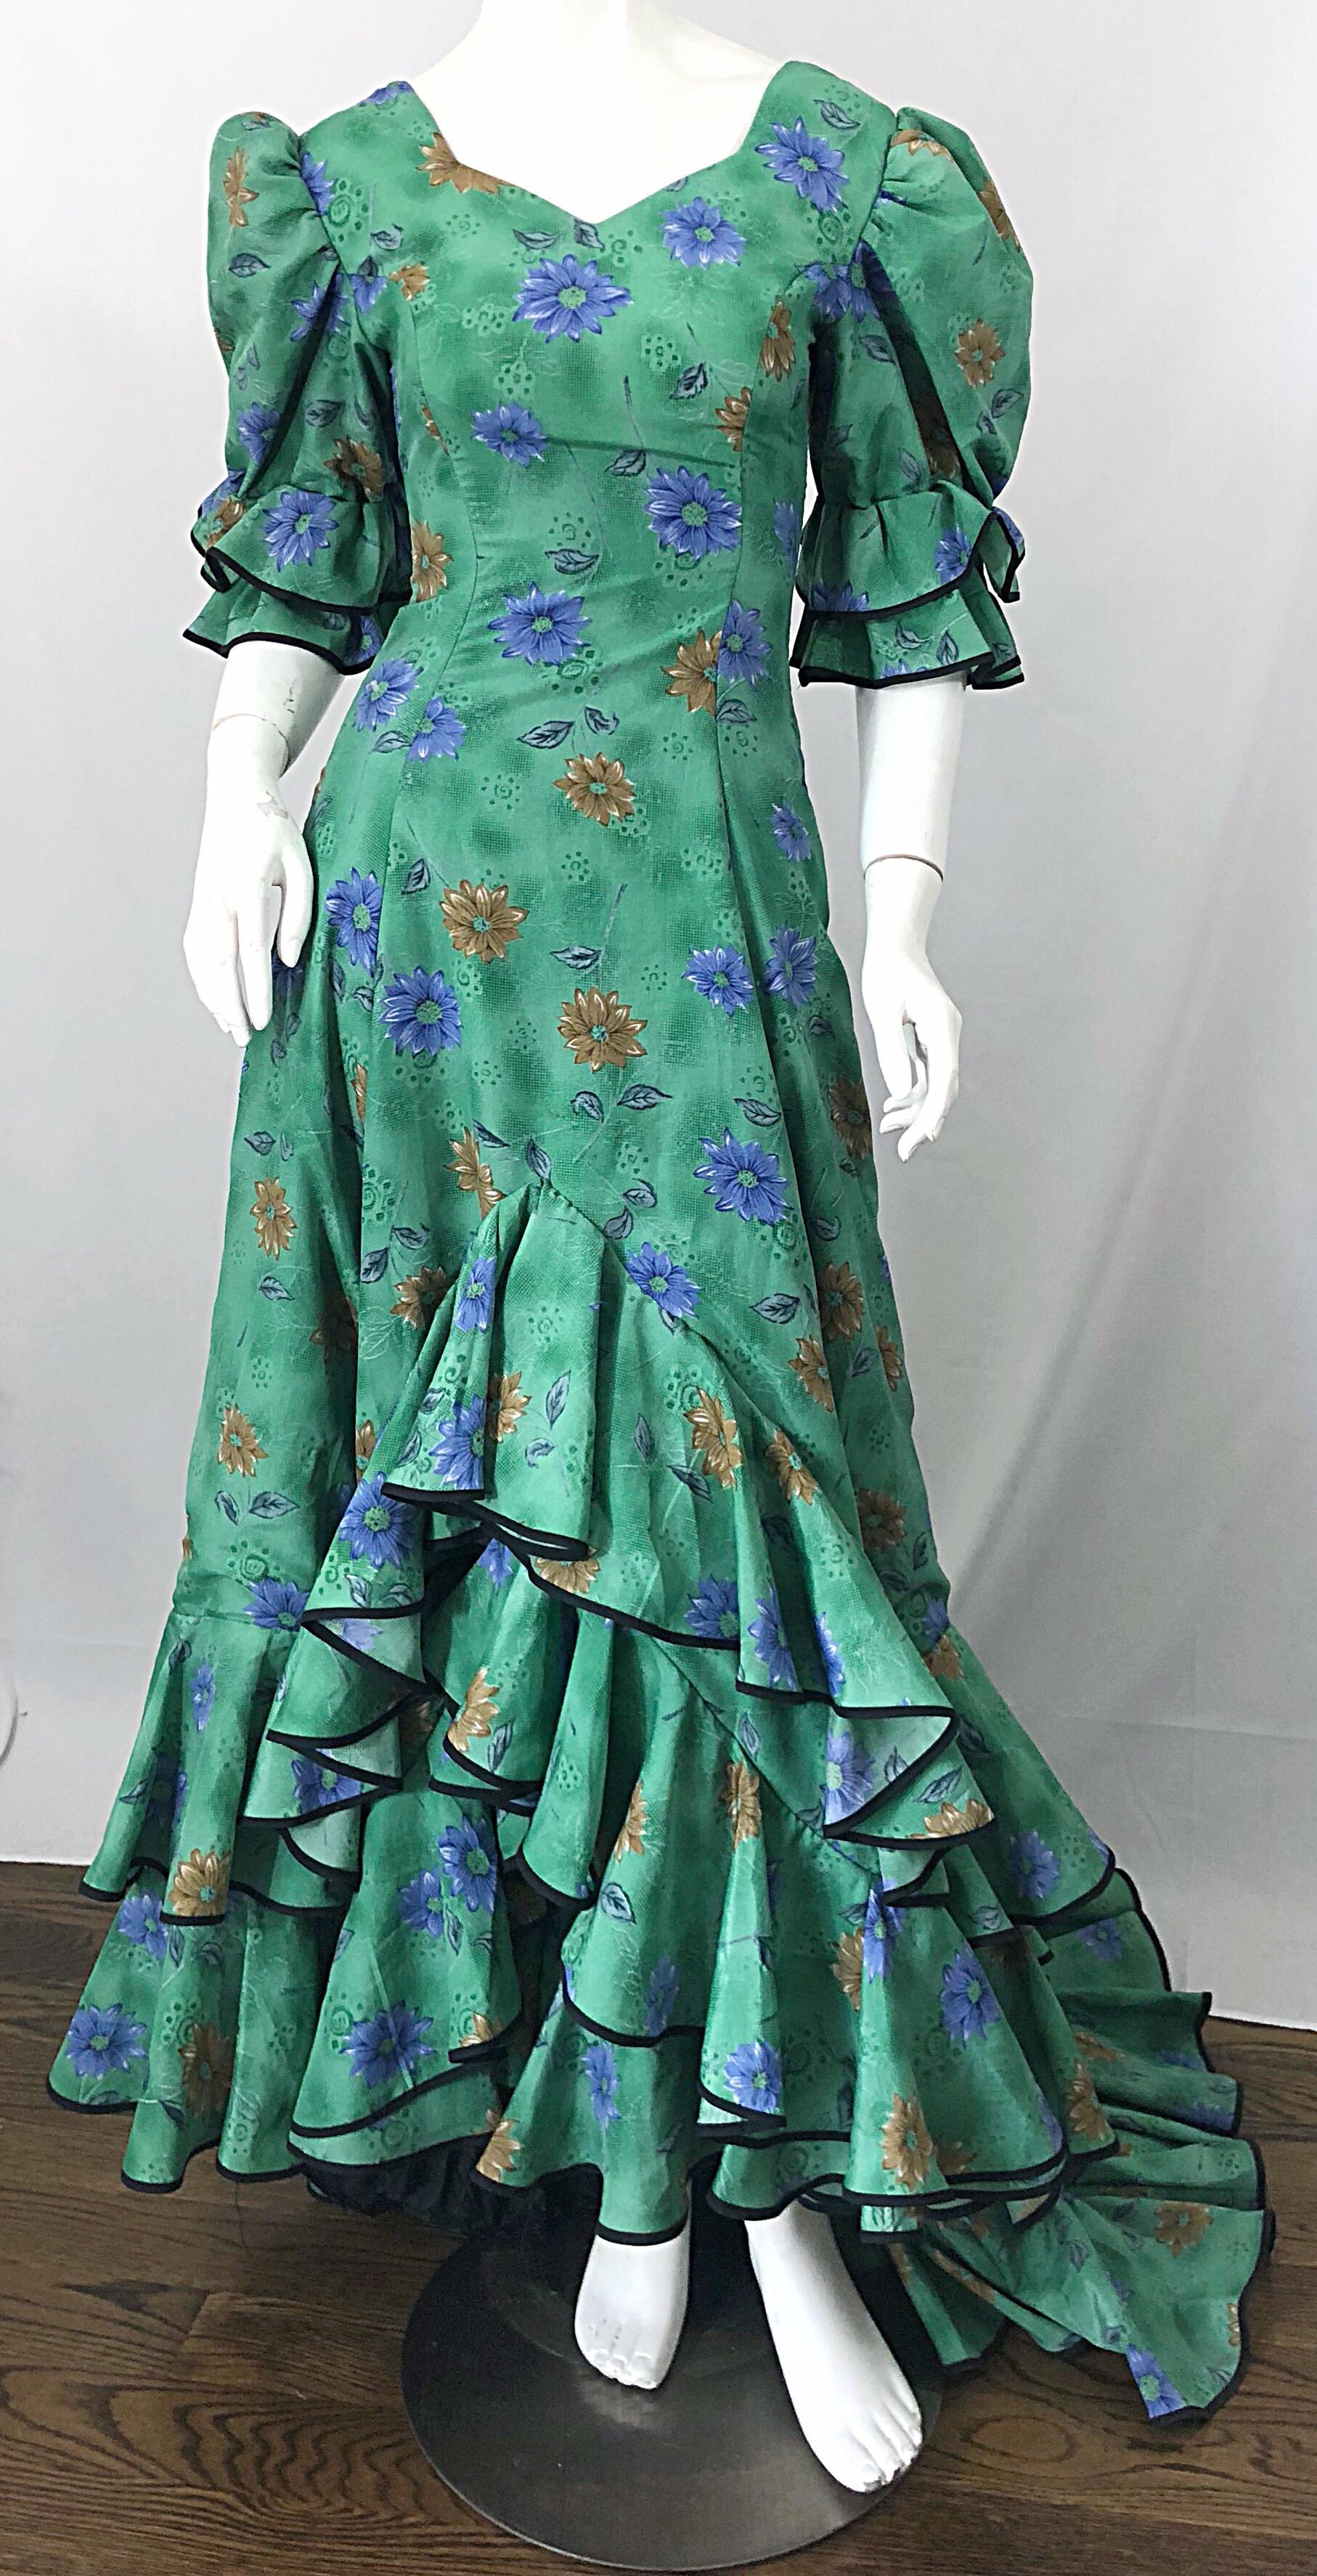 Amazing Vintage Victorian Inspired 1970s Does 1800s Steampunk Green Trained Gown For Sale 5